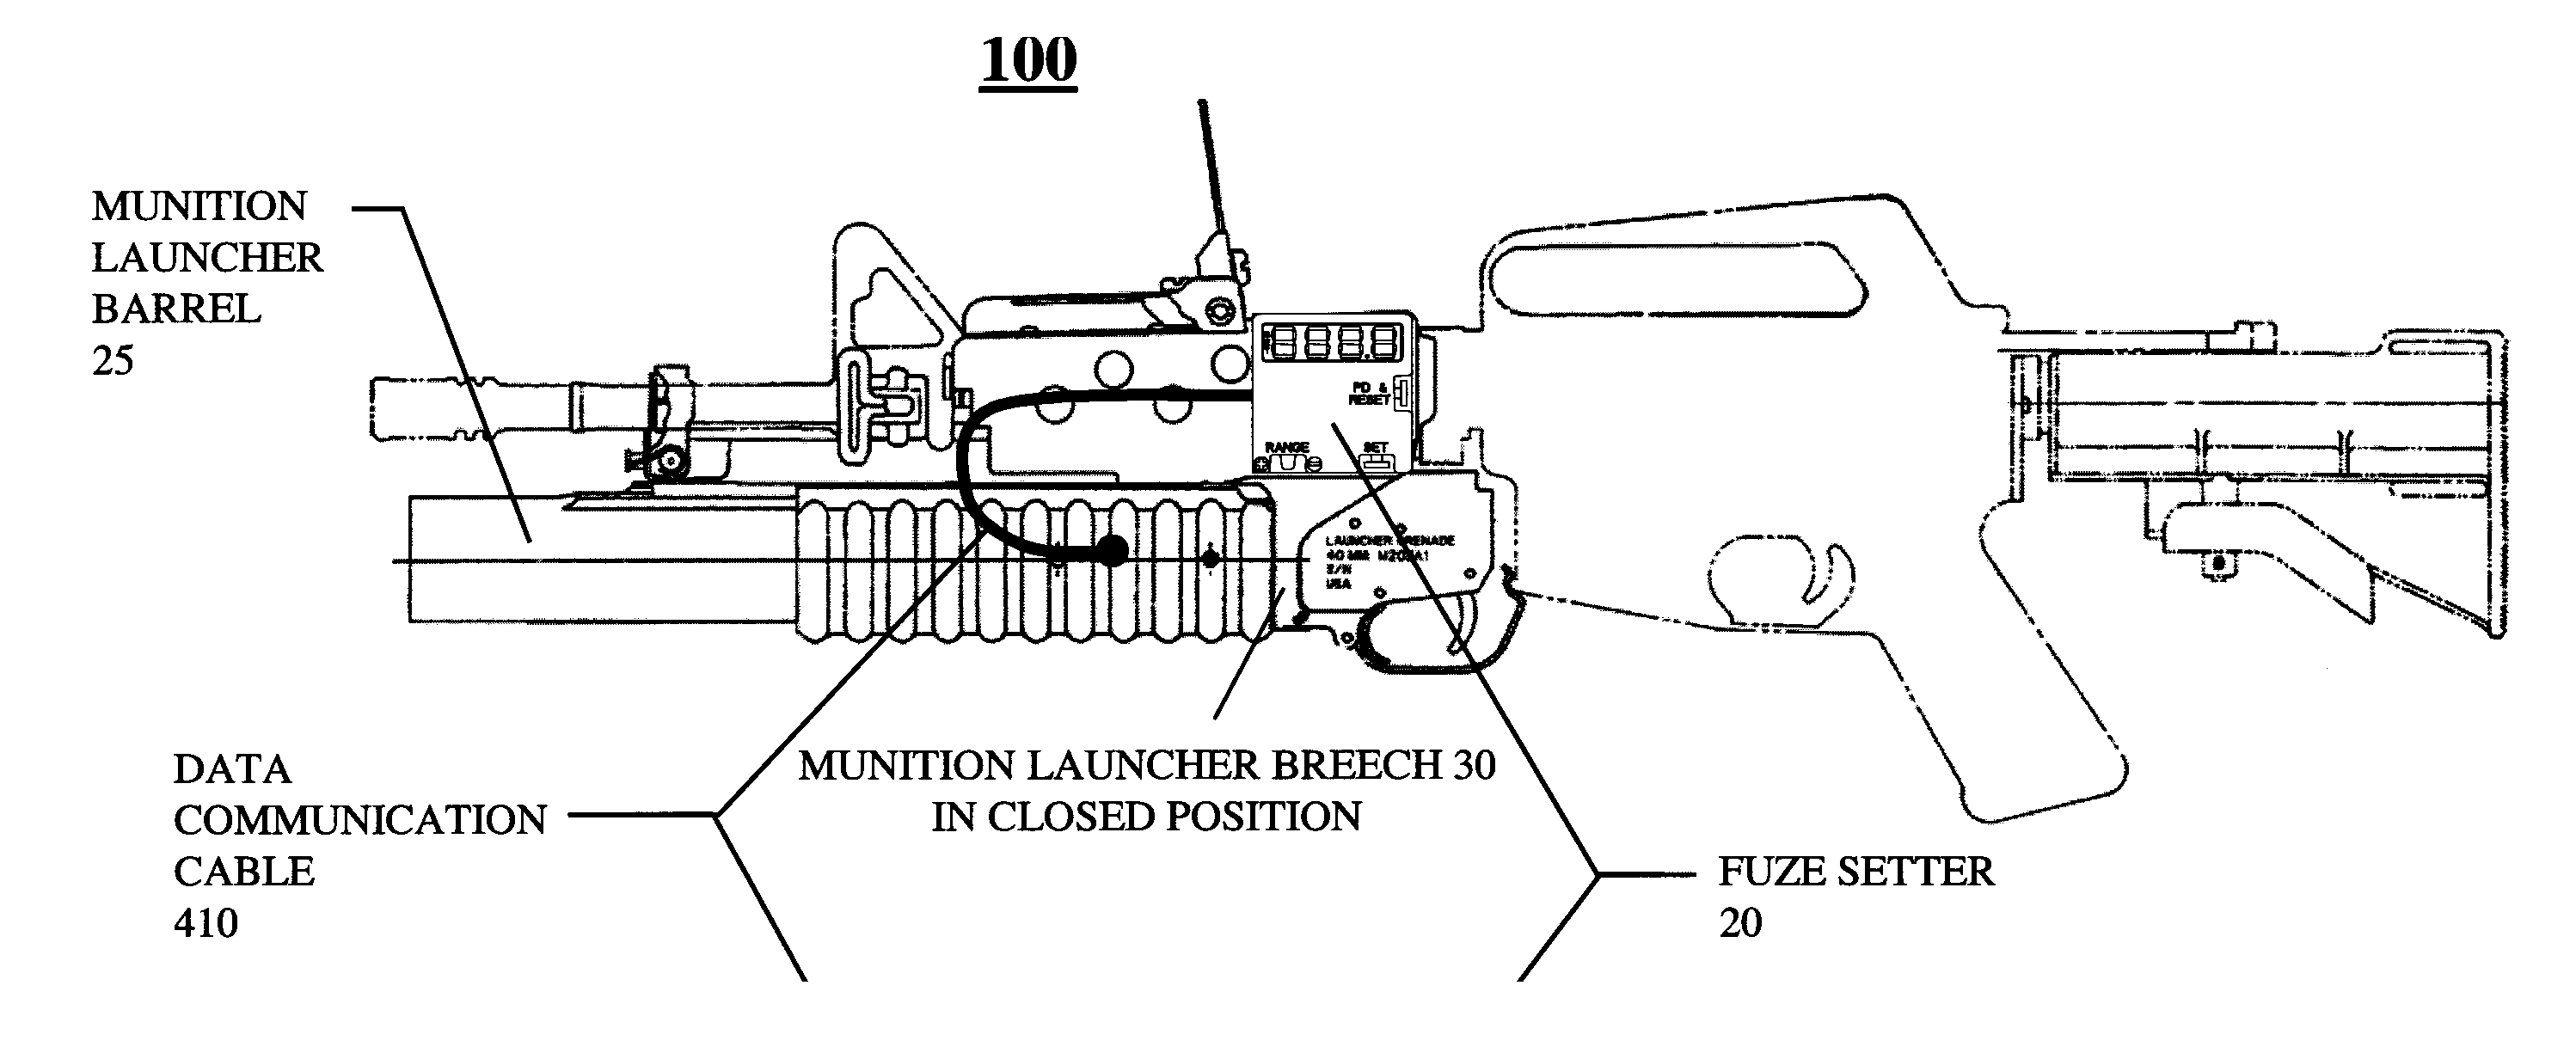 Low velocity air burst munition and launcher system implemented on an existing weapon